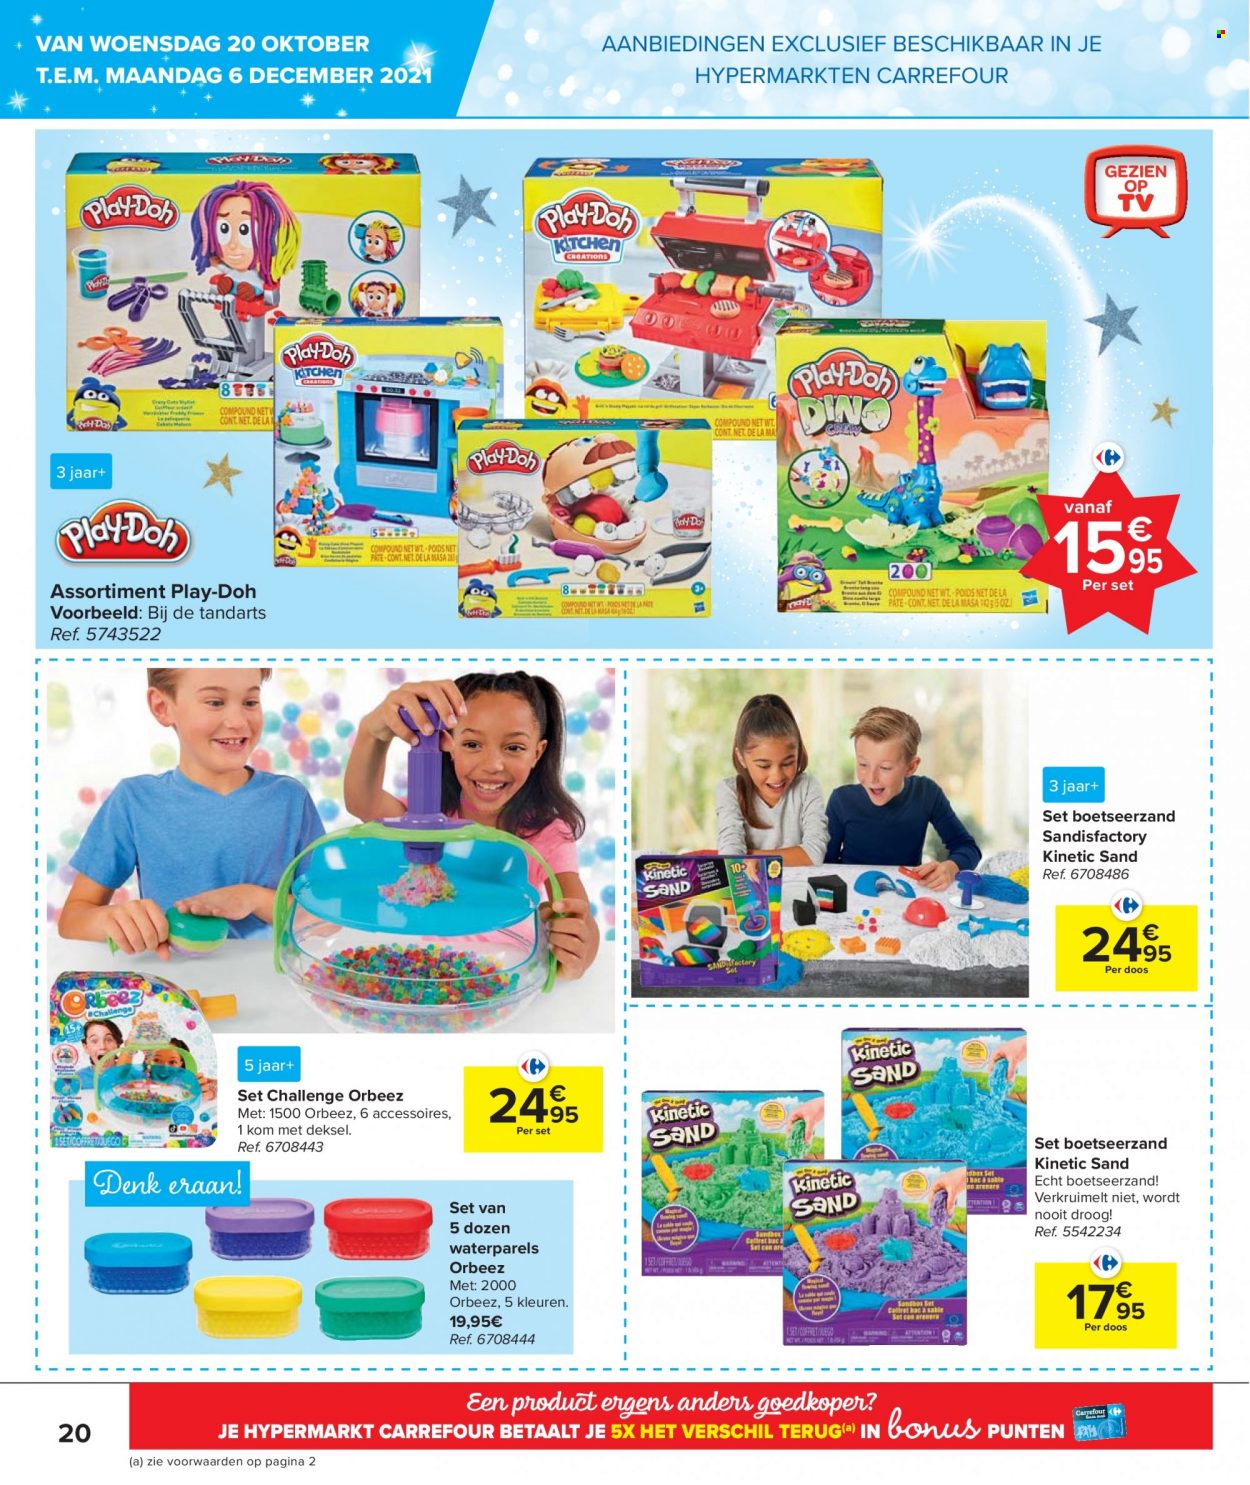 Catalogue Carrefour hypermarkt - 20.10.2021 - 6.12.2021. Page 20.